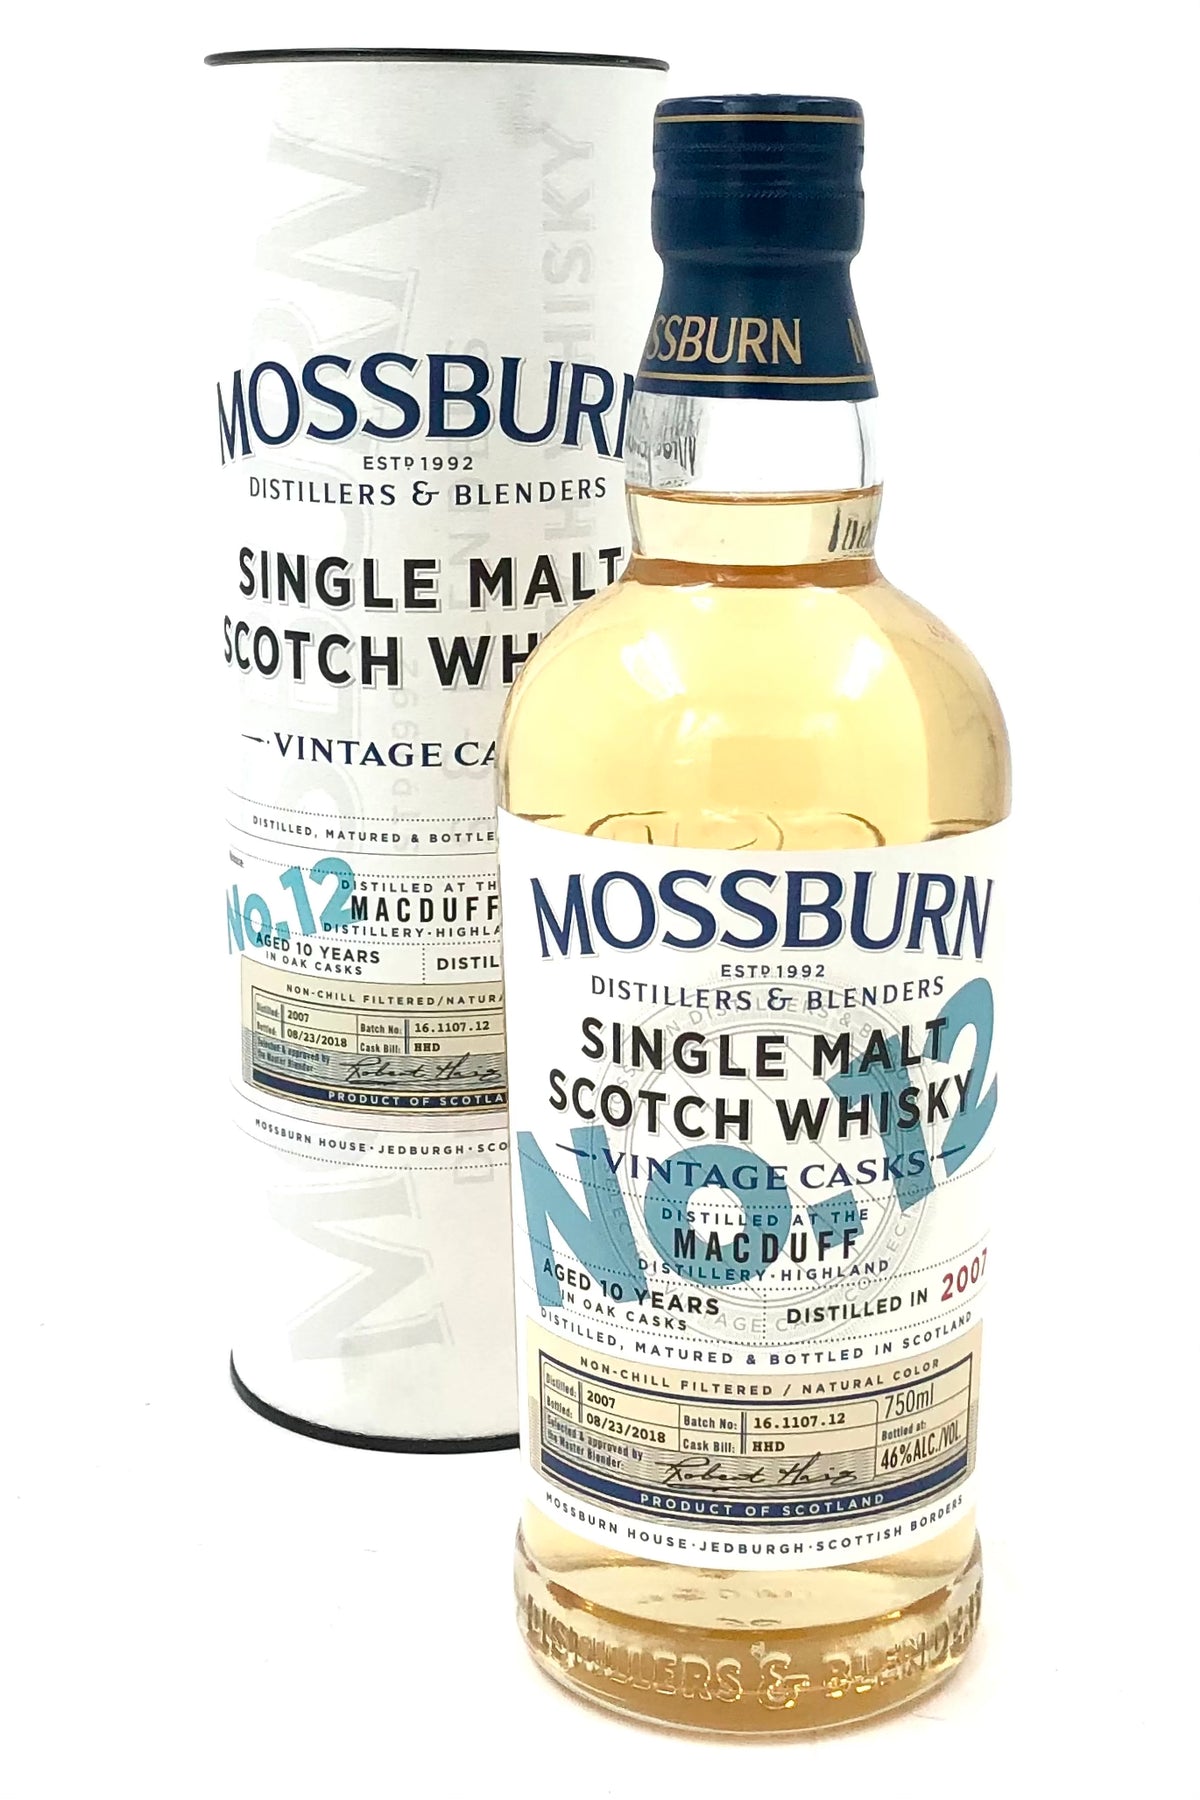 Macduff 10 Years Old No. 12 Scotch Whisky by Mossburn Distillers